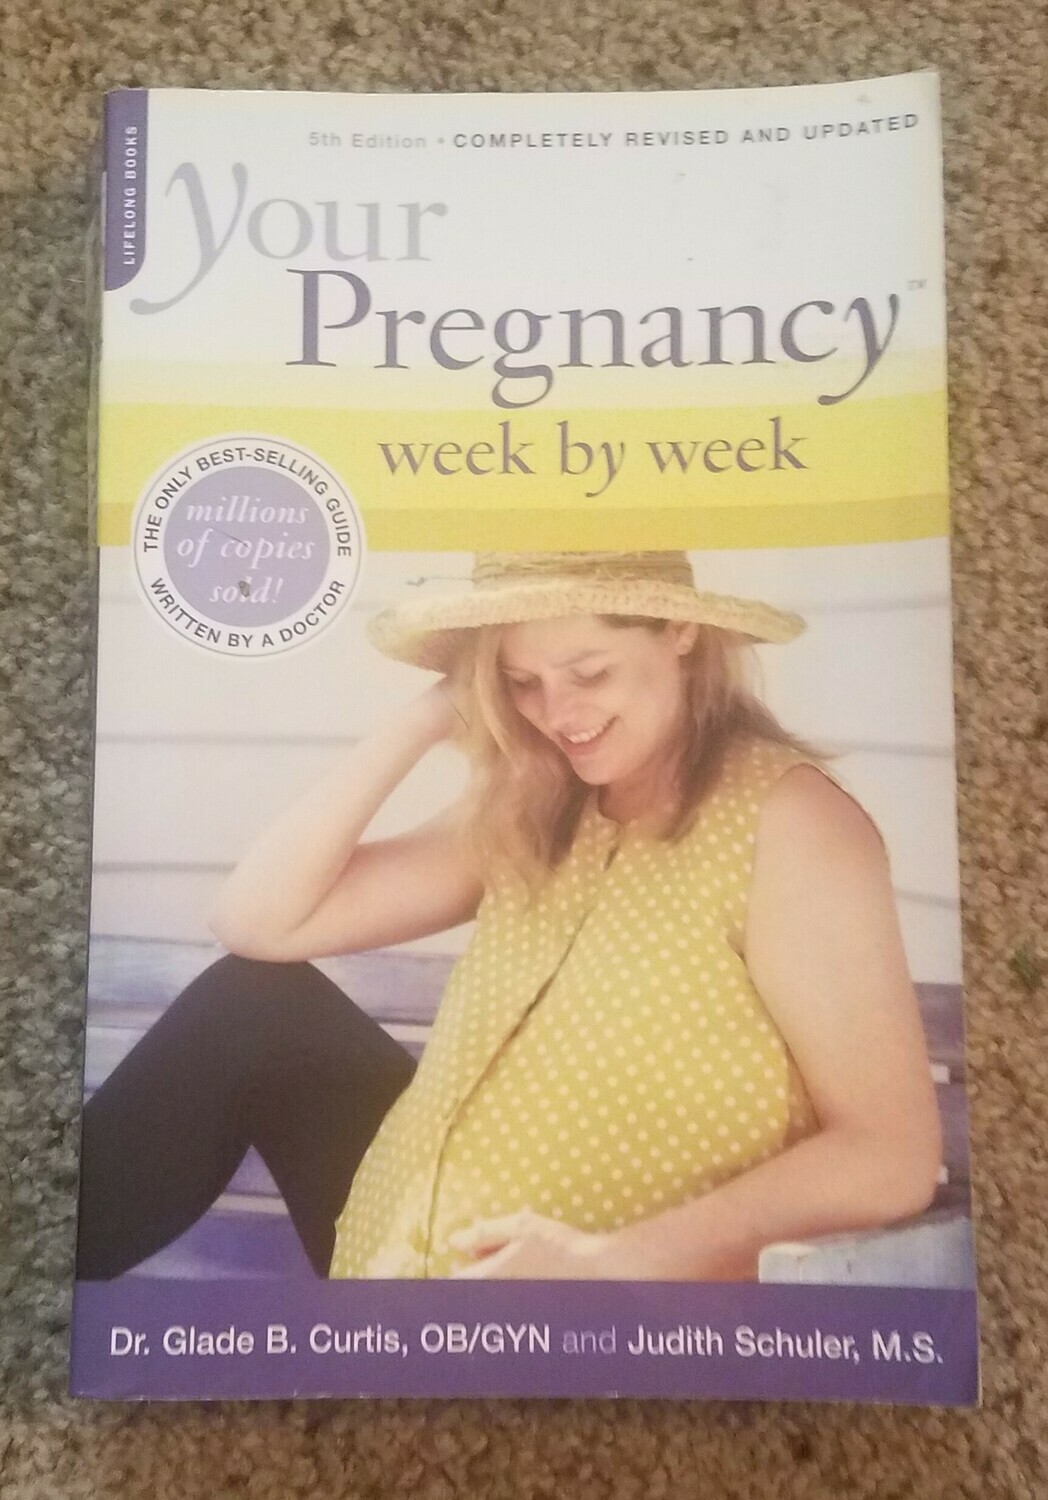 Your Pregnancy Week by Week - Vol. 5 by Dr. Glade B. Curtis and Judith Schuler